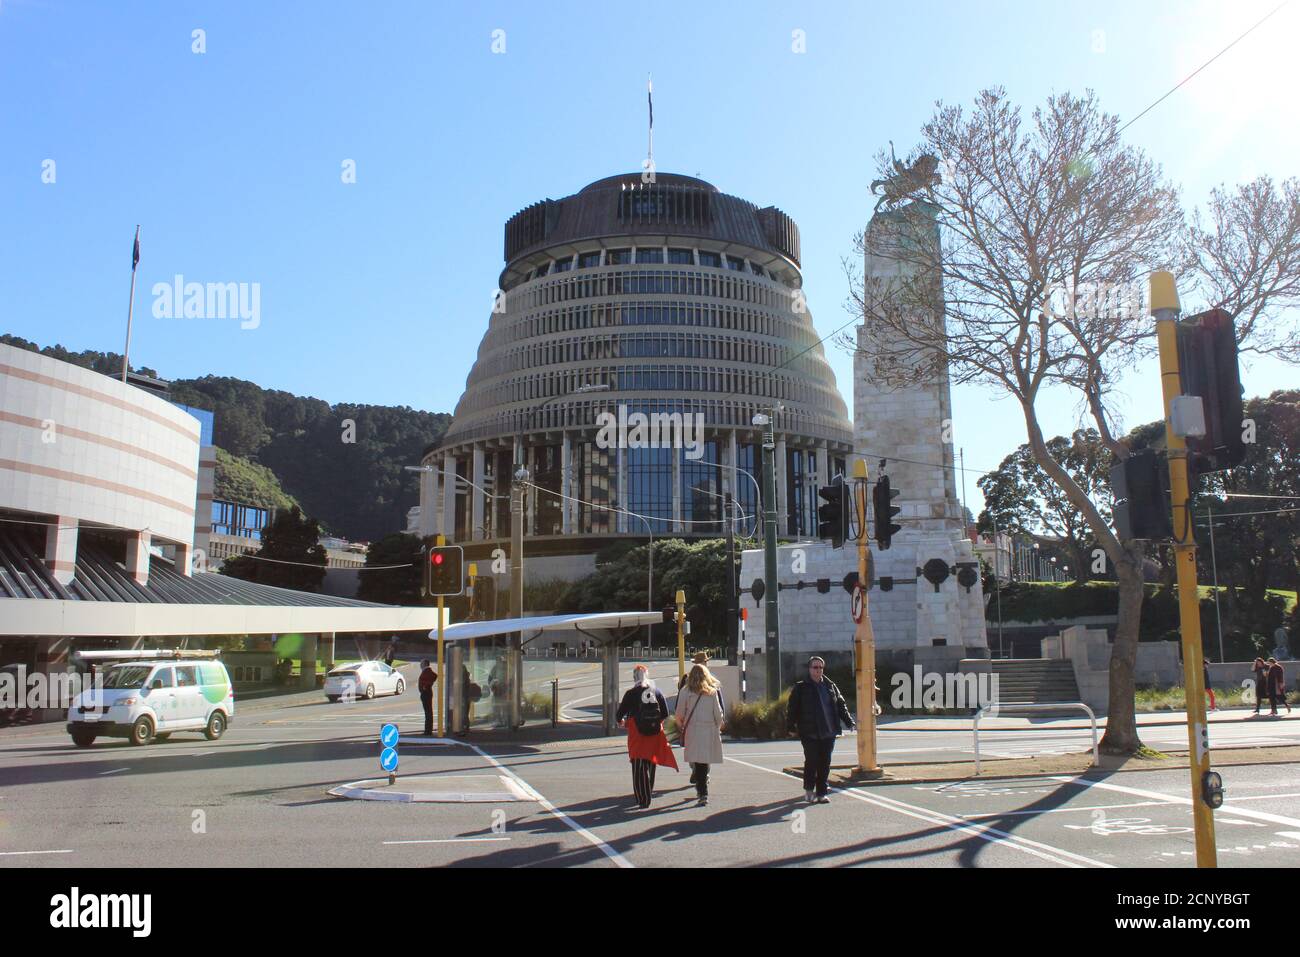 A view shows the Executive Wing of the New Zealand Parliament complex, popularly known as 'Beehive' because of the building’s shape, in Wellington, New Zealand July 23, 2020. Picture taken July 23, 2020. REUTERS/Praveen Menon Stock Photo